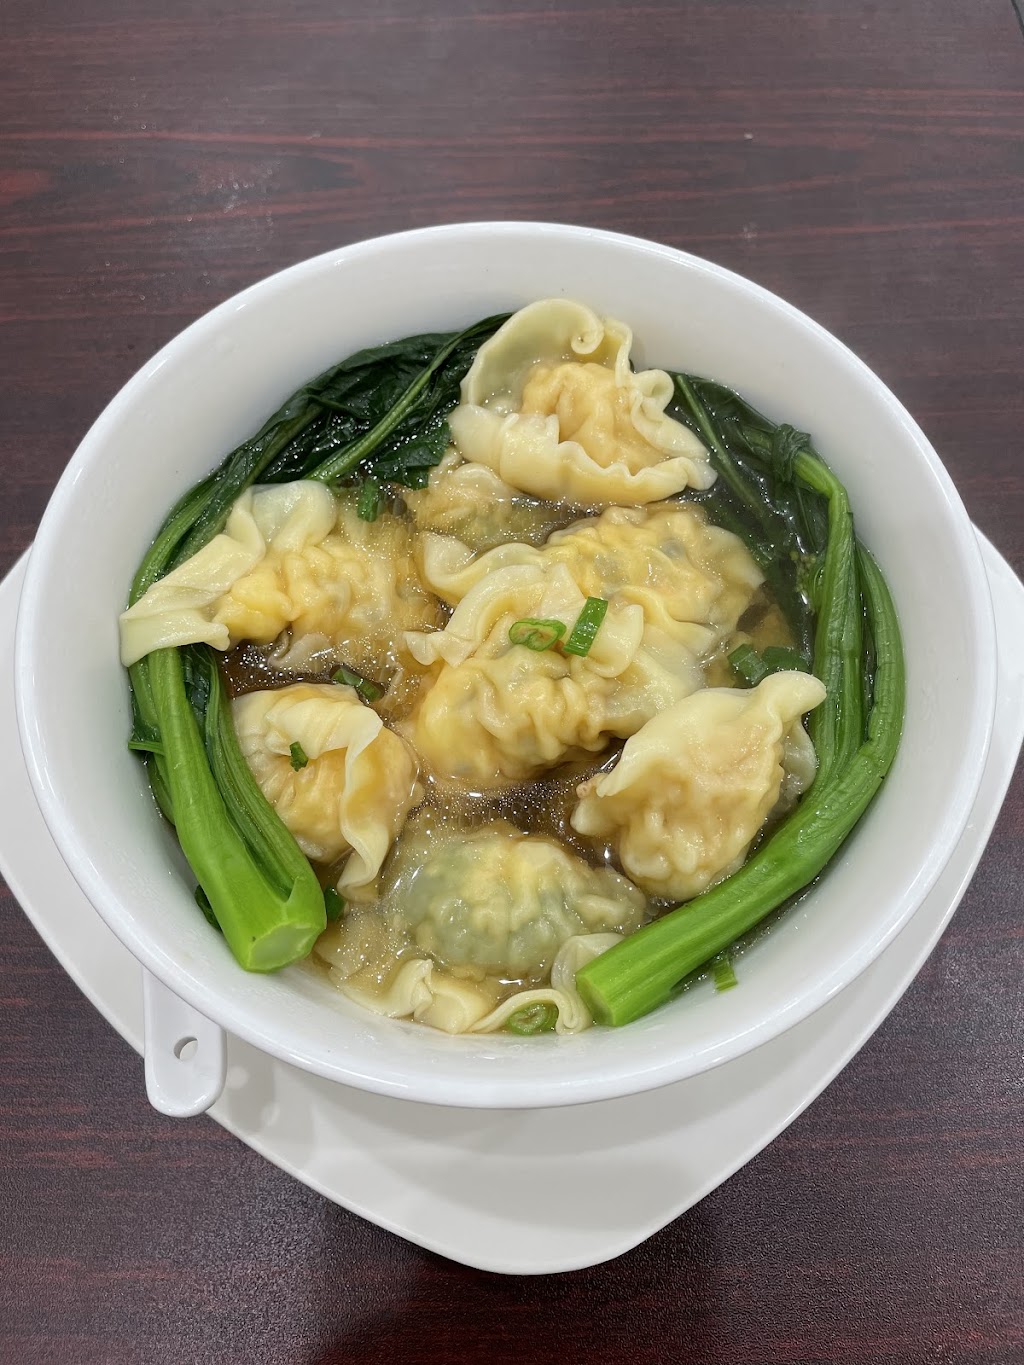 Sweet Wonton House | restaurant | 253-25 Northern Blvd, Queens, NY 11362, USA | 7188198391 OR +1 718-819-8391